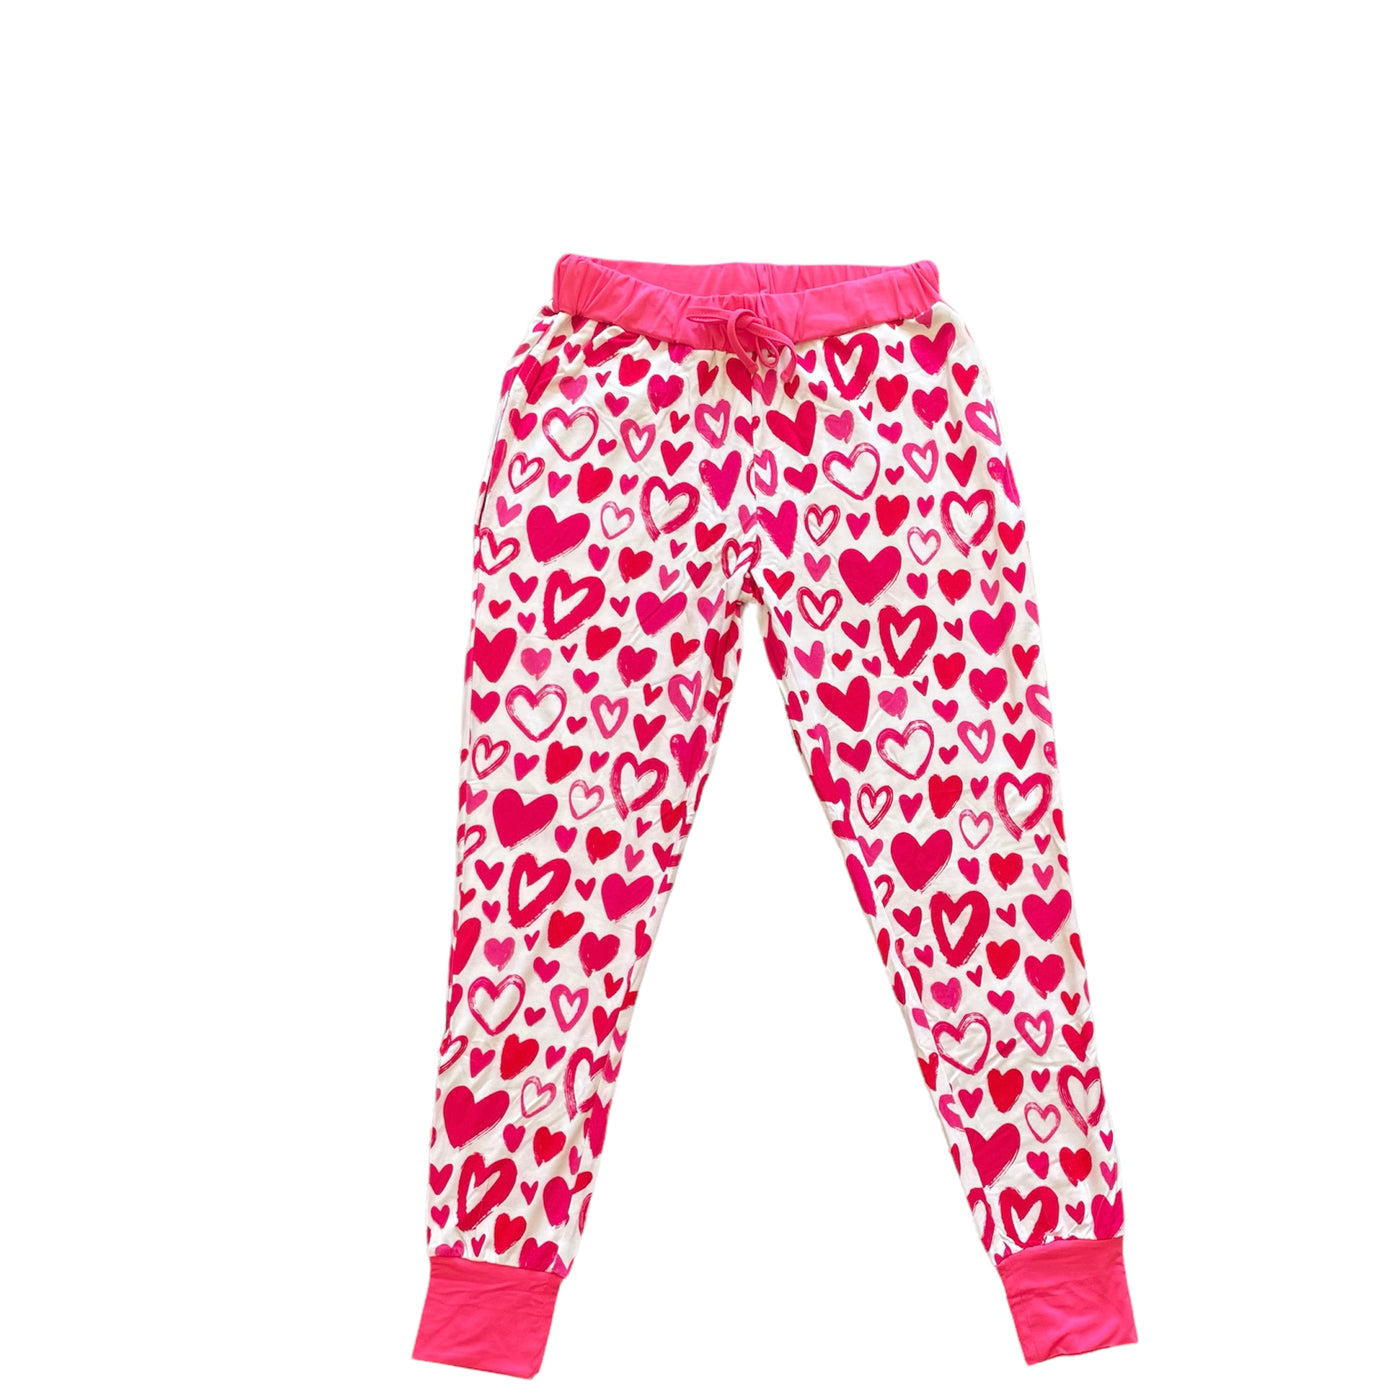 ESTHER "All you need is love" Womens Ankle Pajama Pants